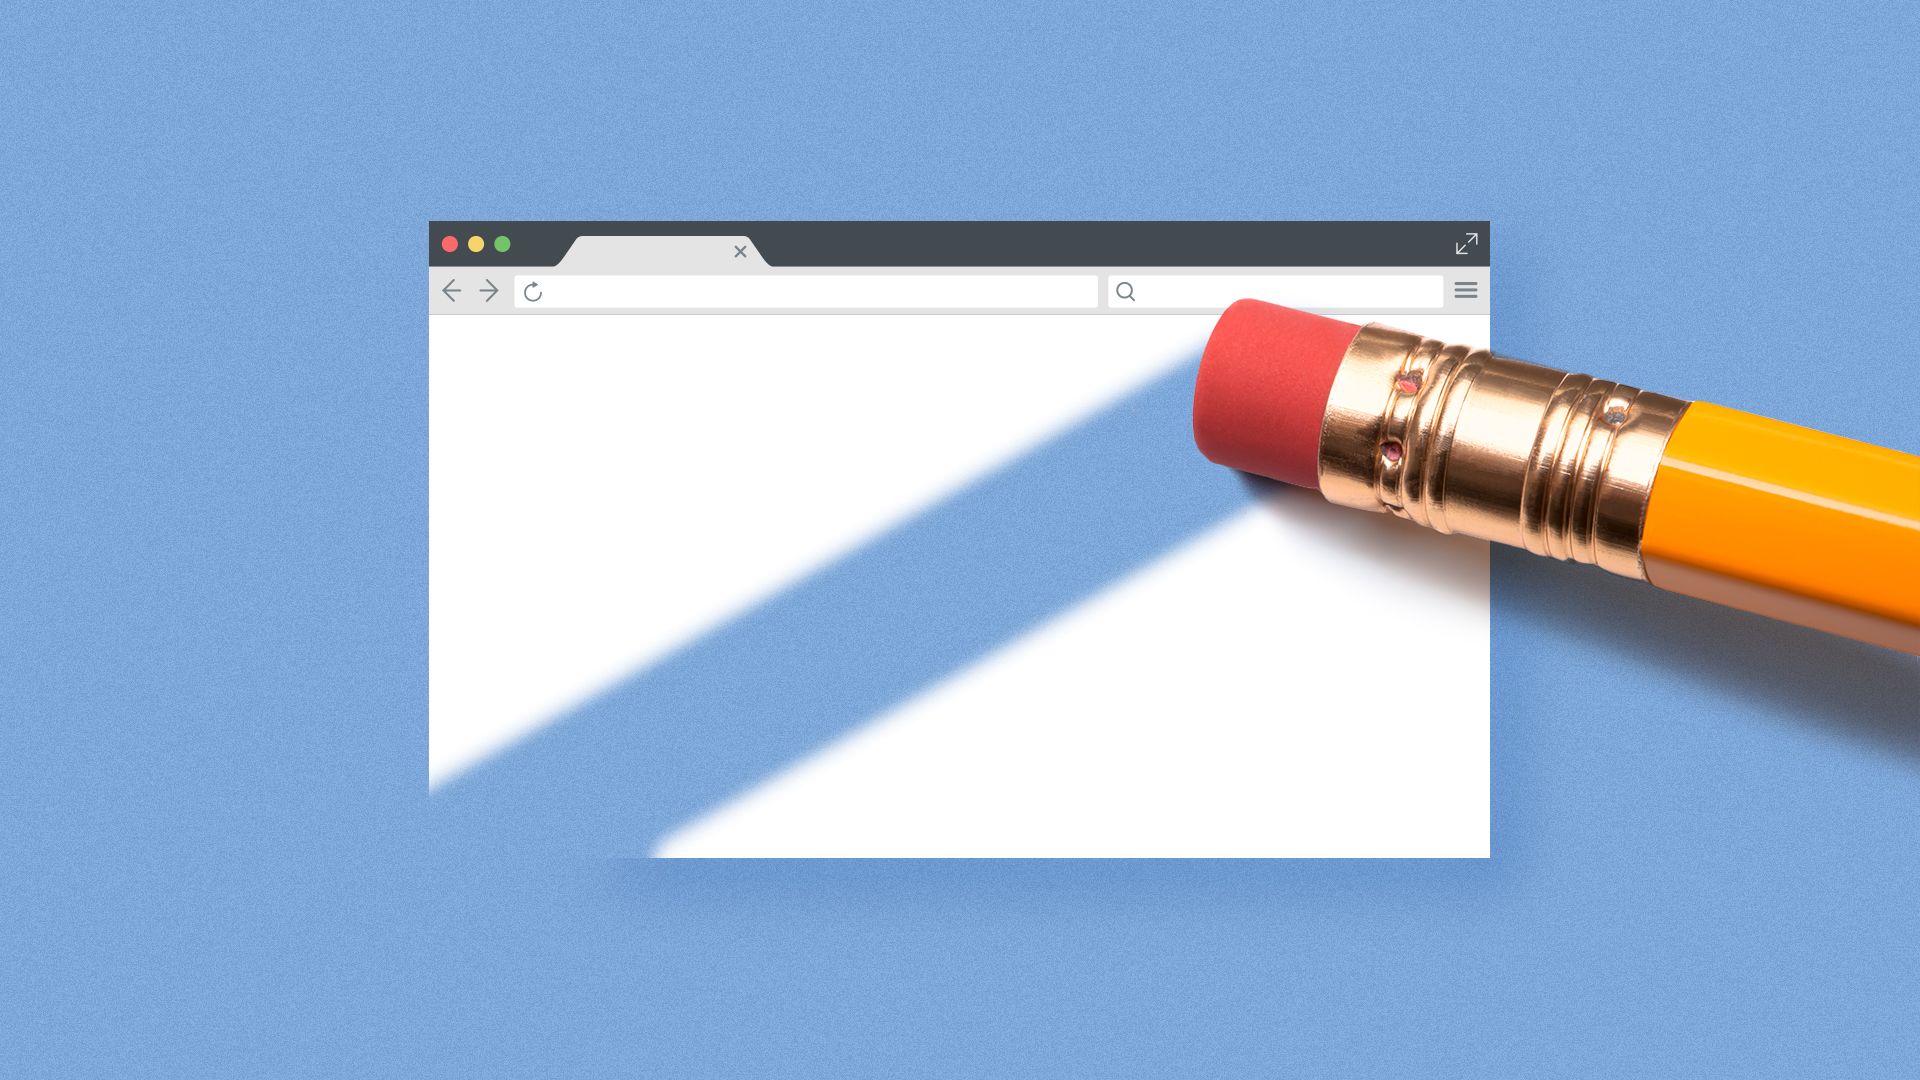 Illustration of a giant pencil erasing a browser window.